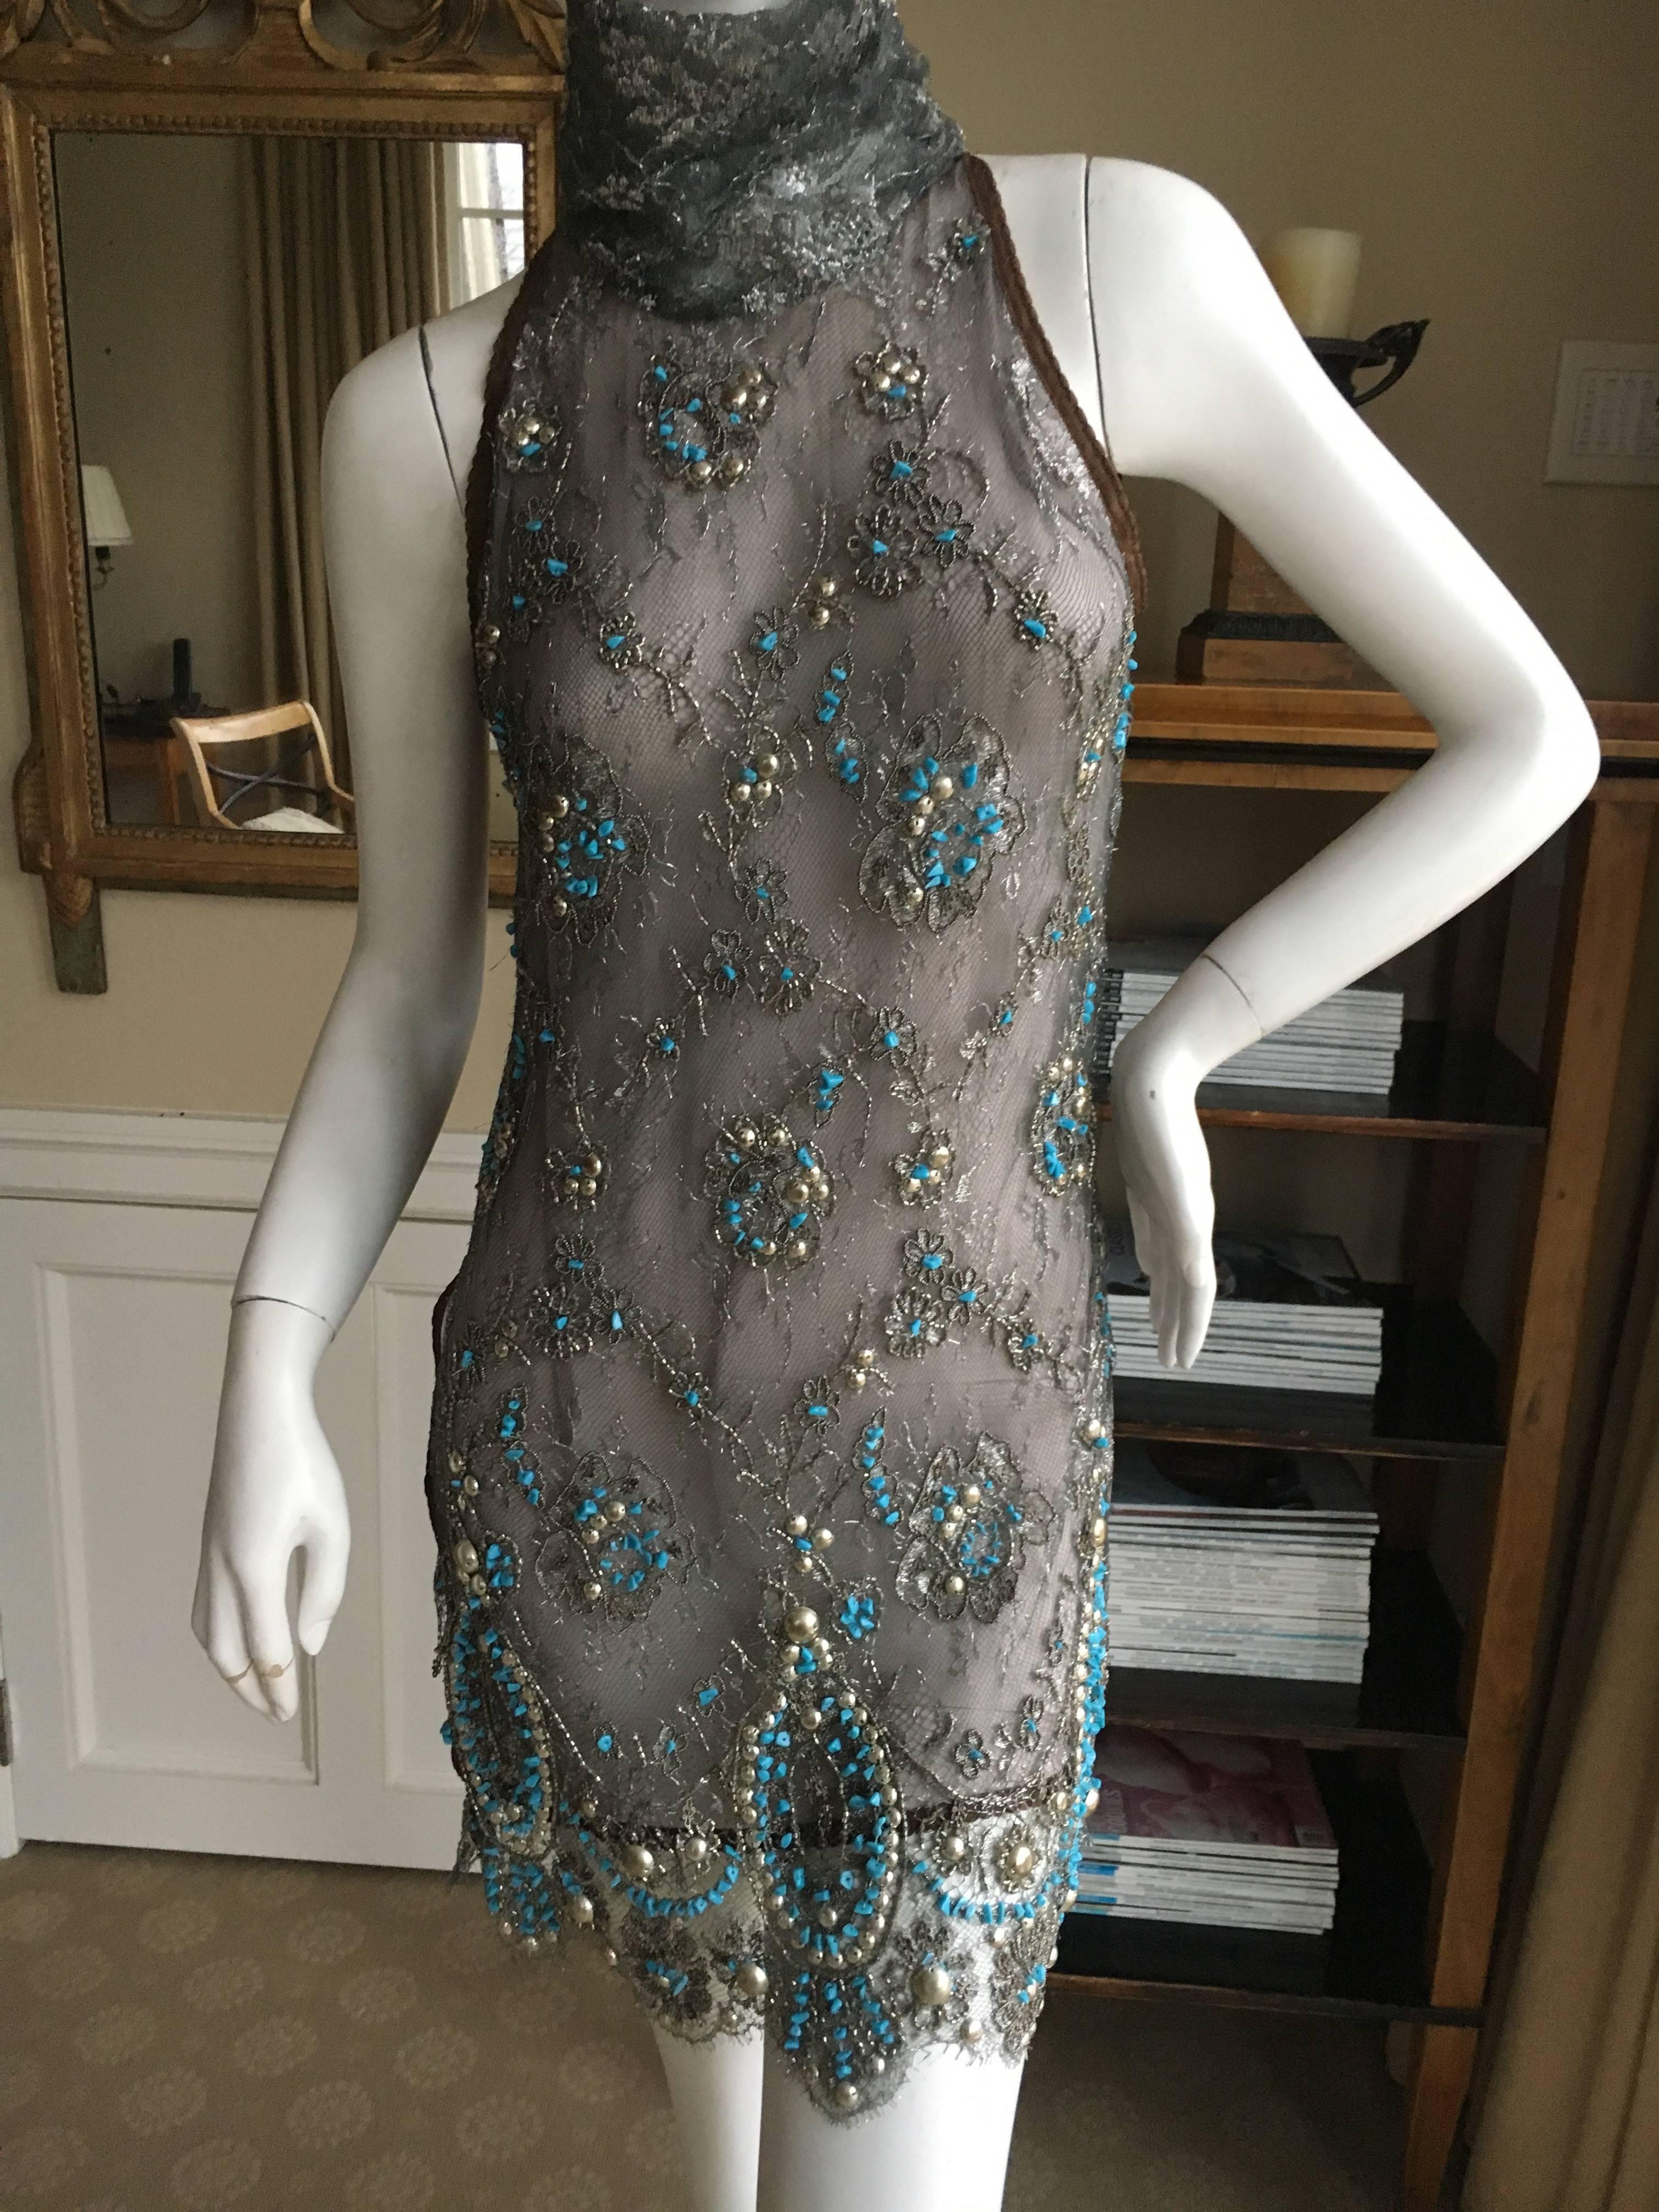 Gianfranco Ferre Silver Lace Tunic with Couture Quality Turquoise Embellishment In Excellent Condition For Sale In Cloverdale, CA